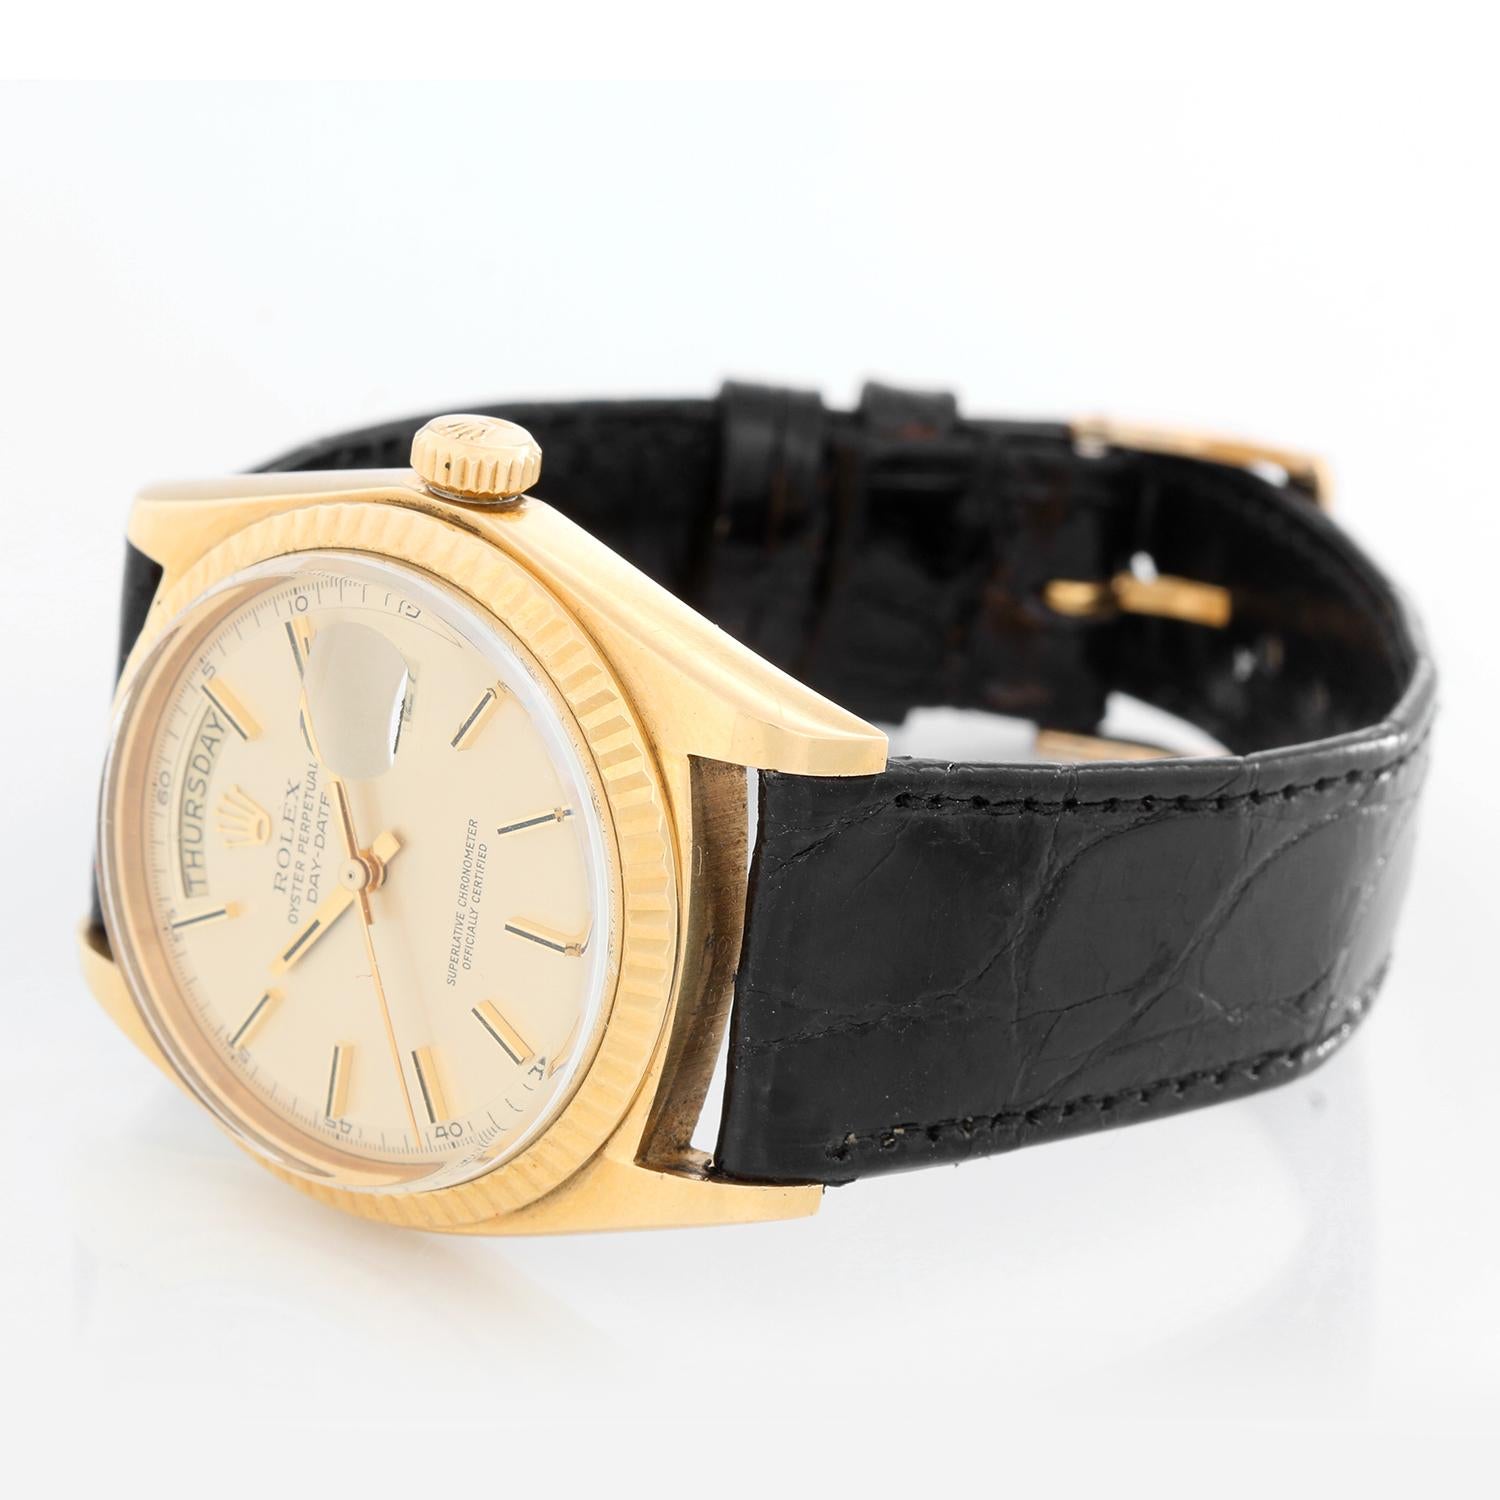 Rolex President Day-Date Men's 18k Yellow Gold Watch 1803 - Automatic winding; 26 jewels, non-quick-set; acrylic crystal. 18k yellow gold case with fluted bezel (36mm diameter). Champagne matte dial with stick hour markers. Black leather strap with